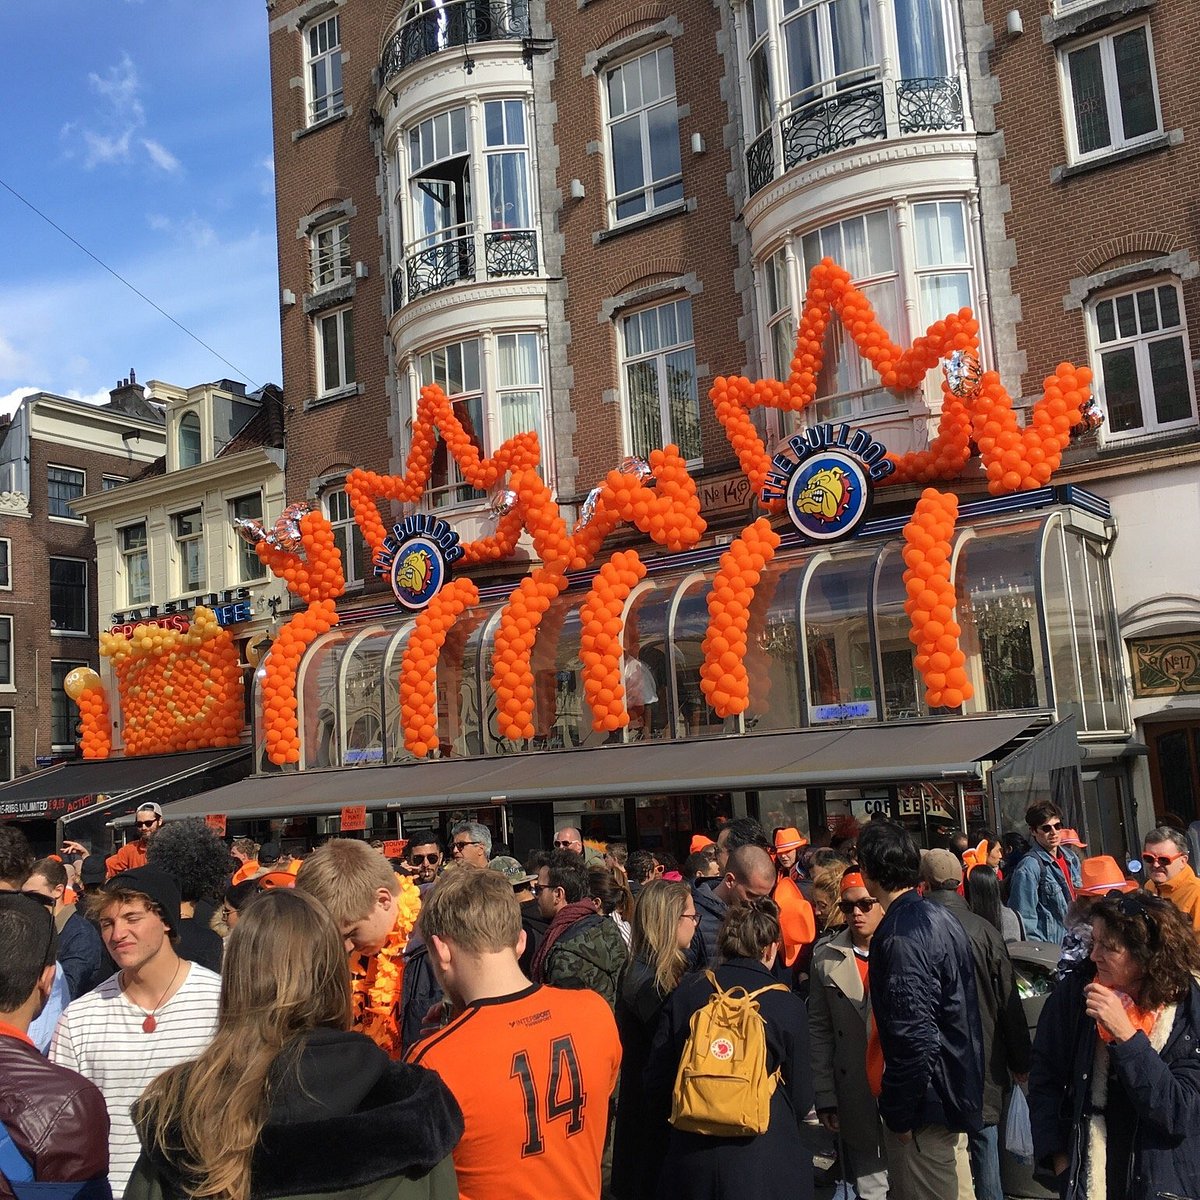 A useful guide to celebrating King's Day in The Netherlands 